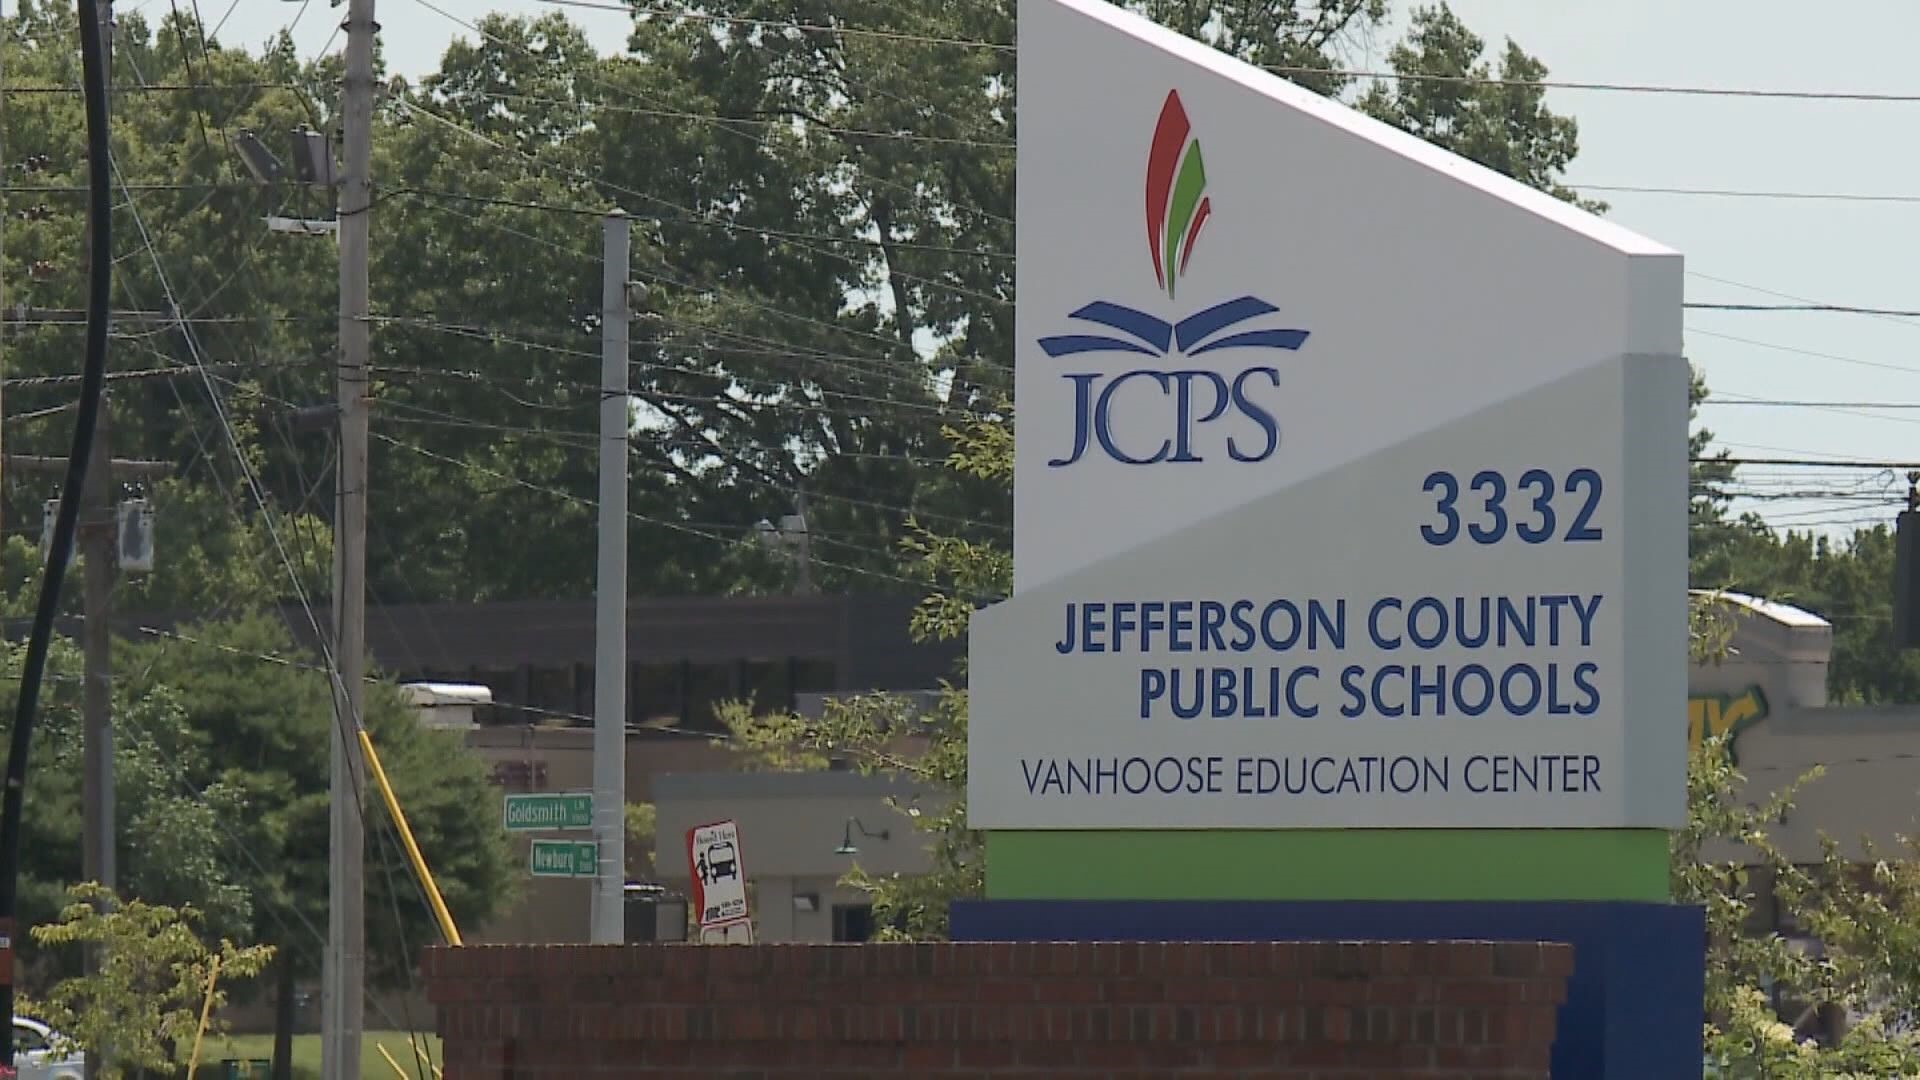 The school district said it is ready to welcome students back in person this year and there are several new protocols in place.